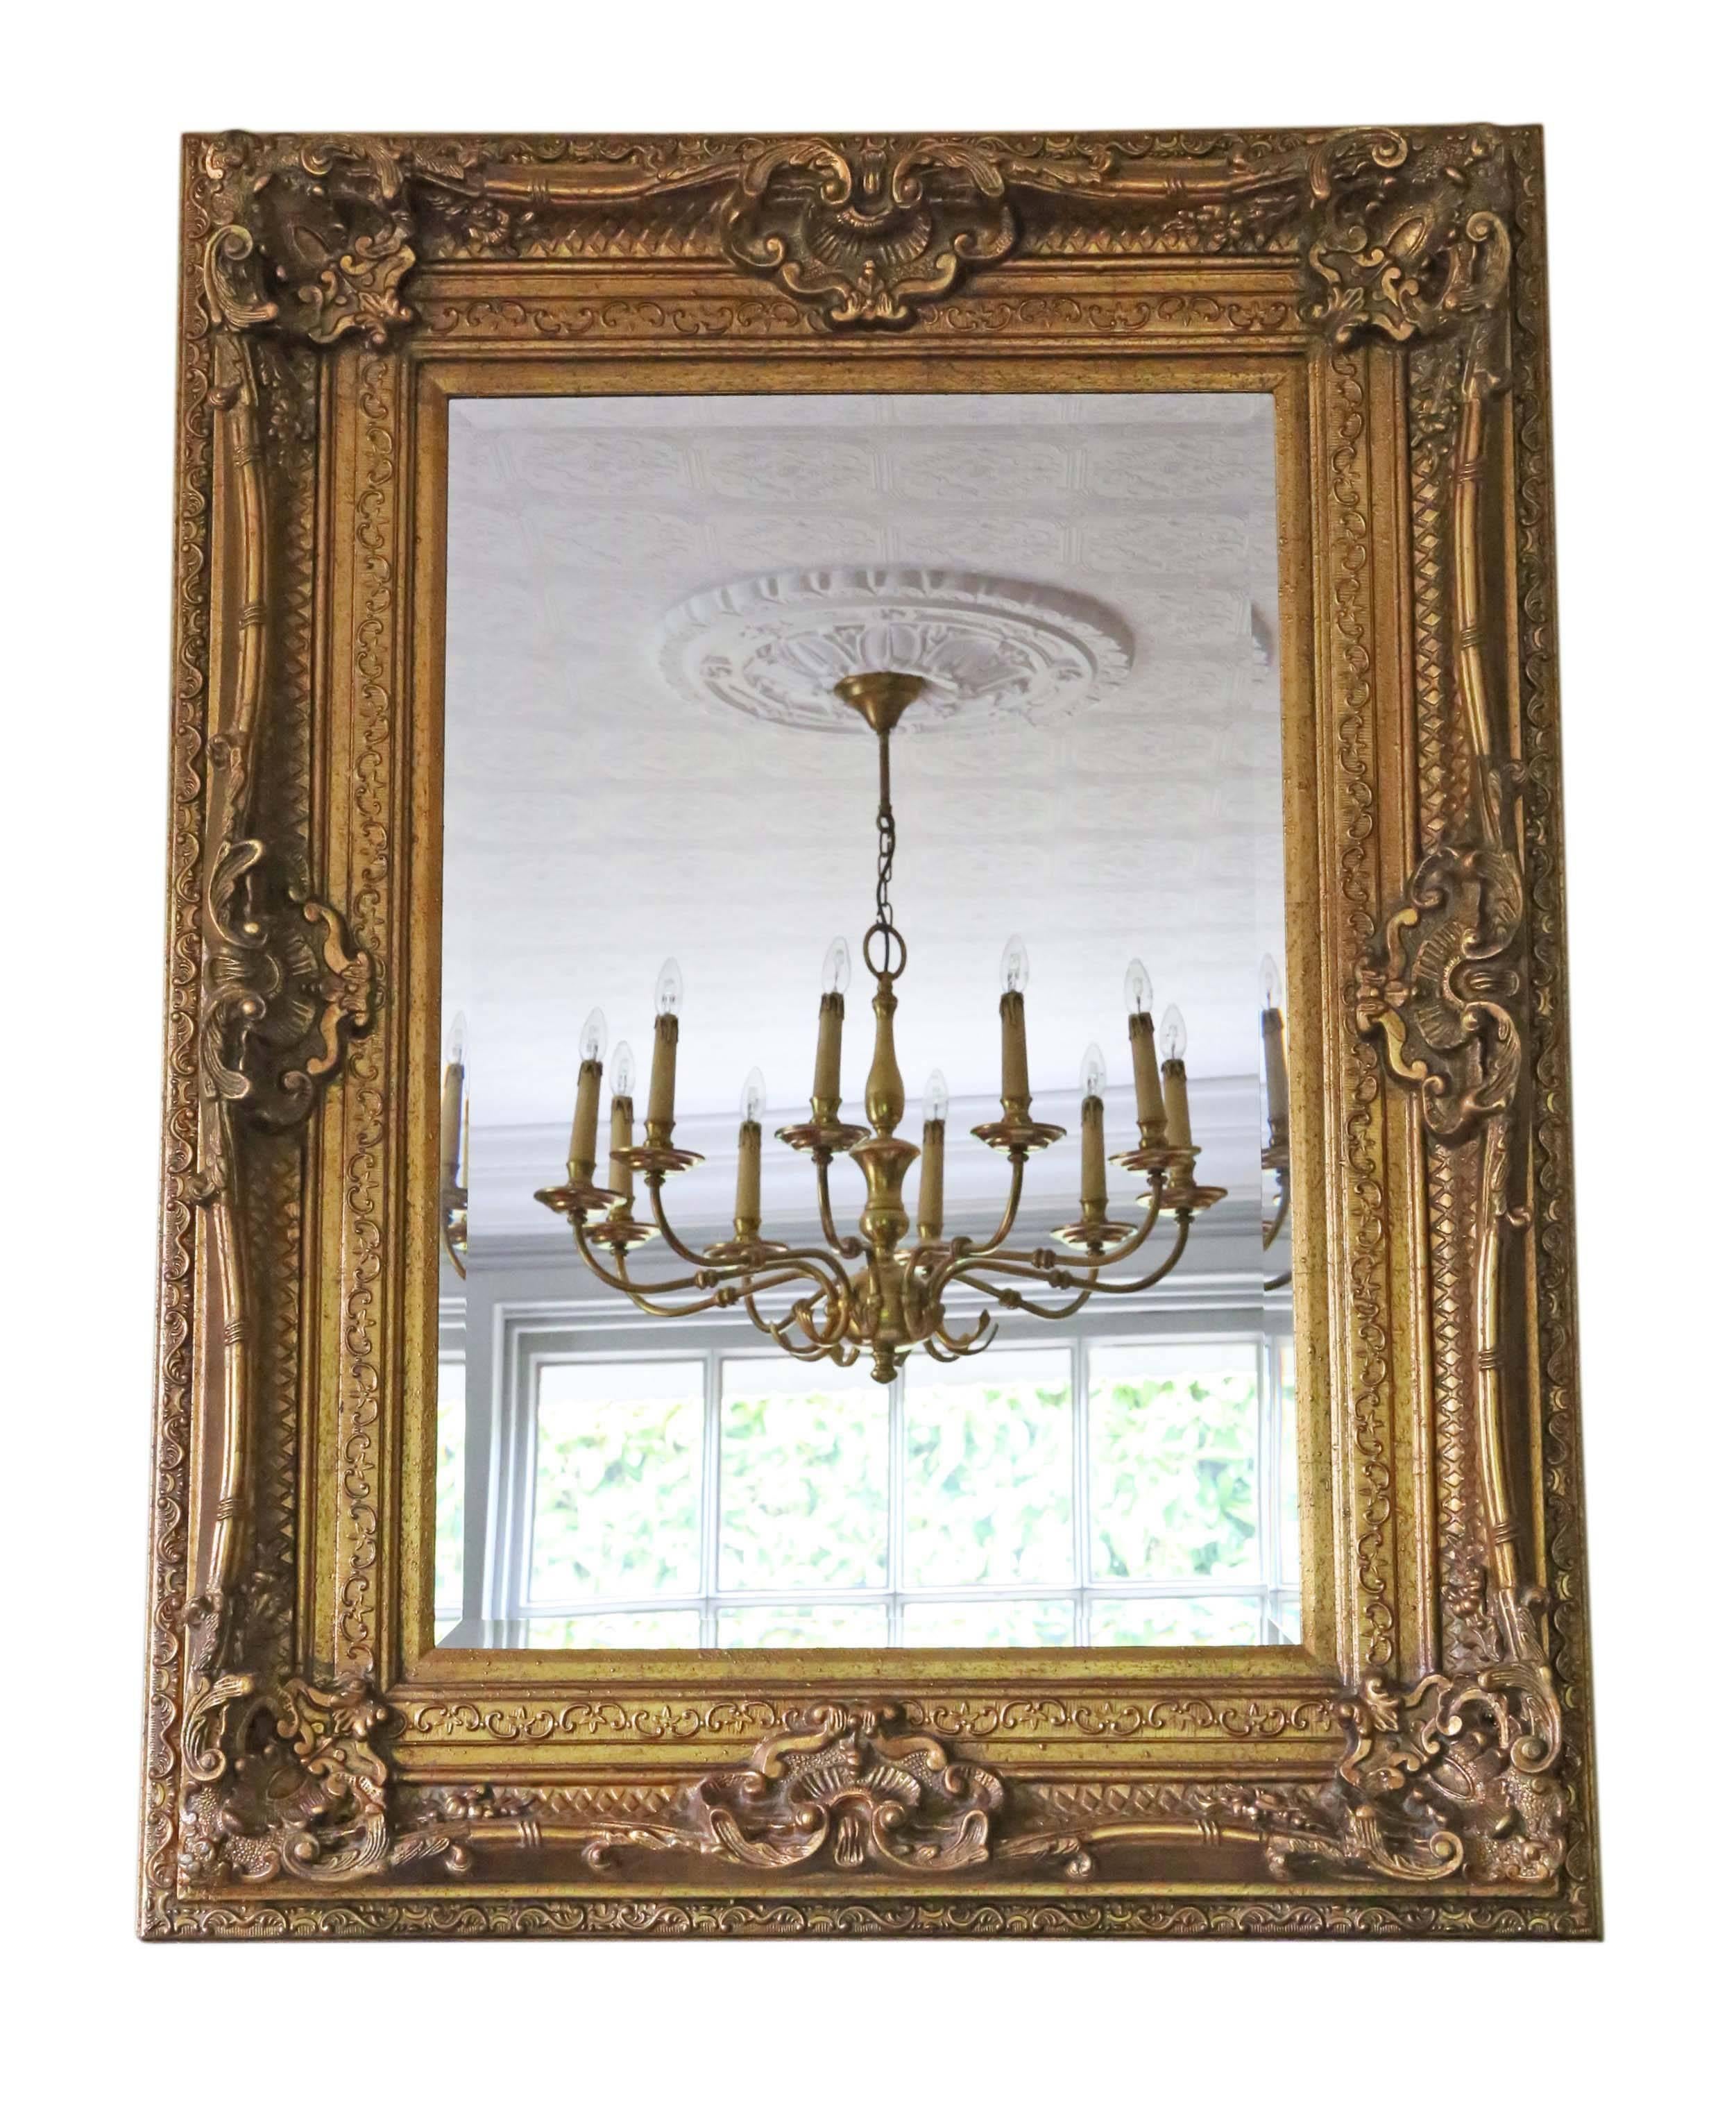 Antique large quality Victorian style reproduction gilt wall mirror.

This is a lovely large impressive mirror. Could be hung in portrait or landscape.

Would look amazing in the right location quite charming.

The frame and bevel edge